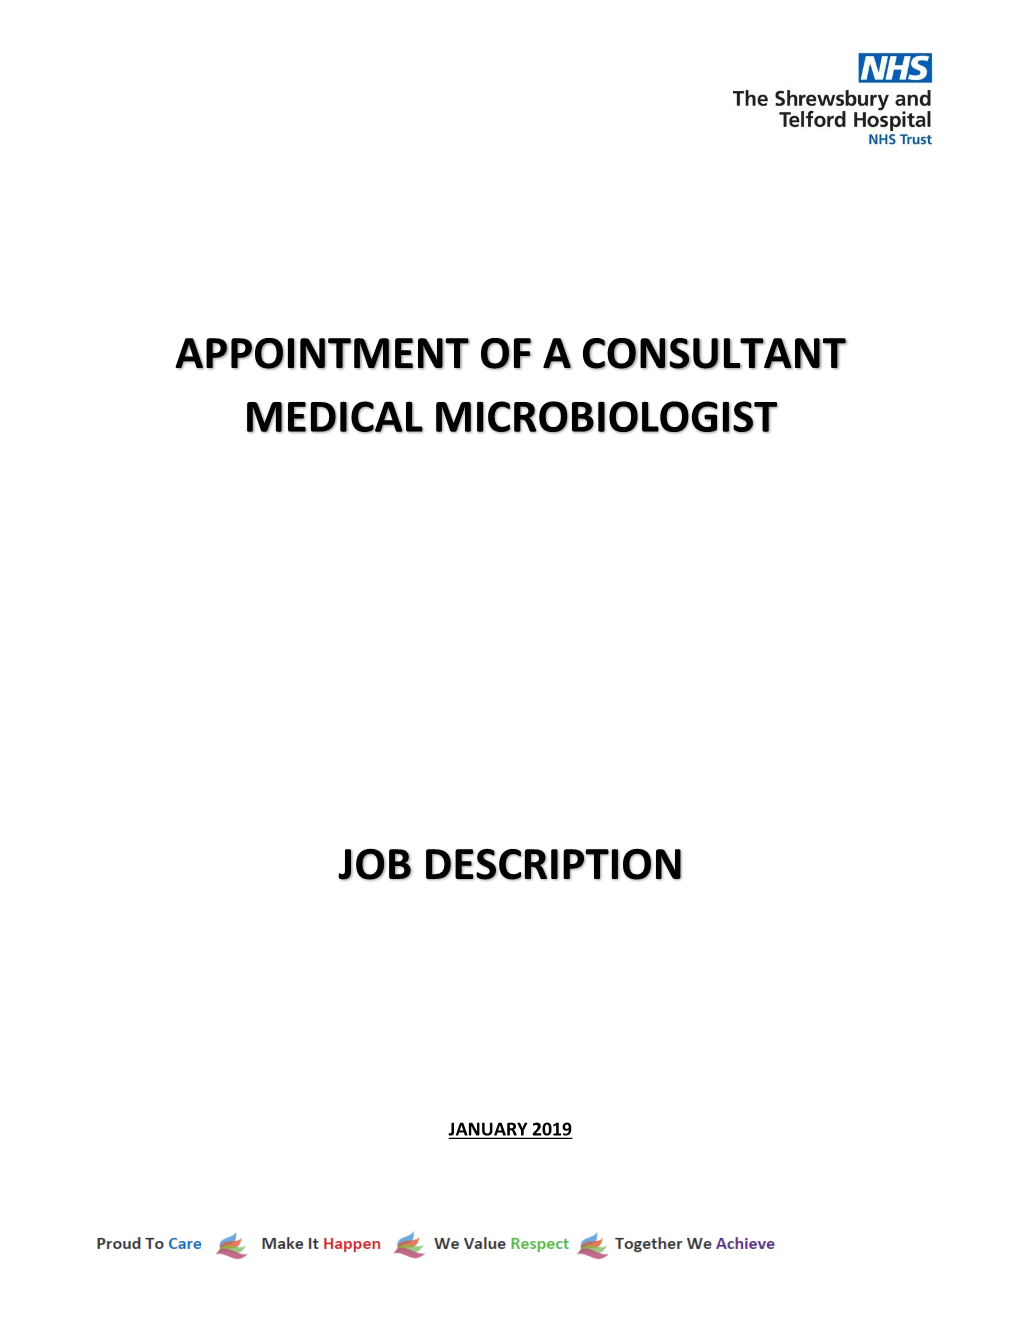 Appointment of a Consultant Medical Microbiologist Job Description